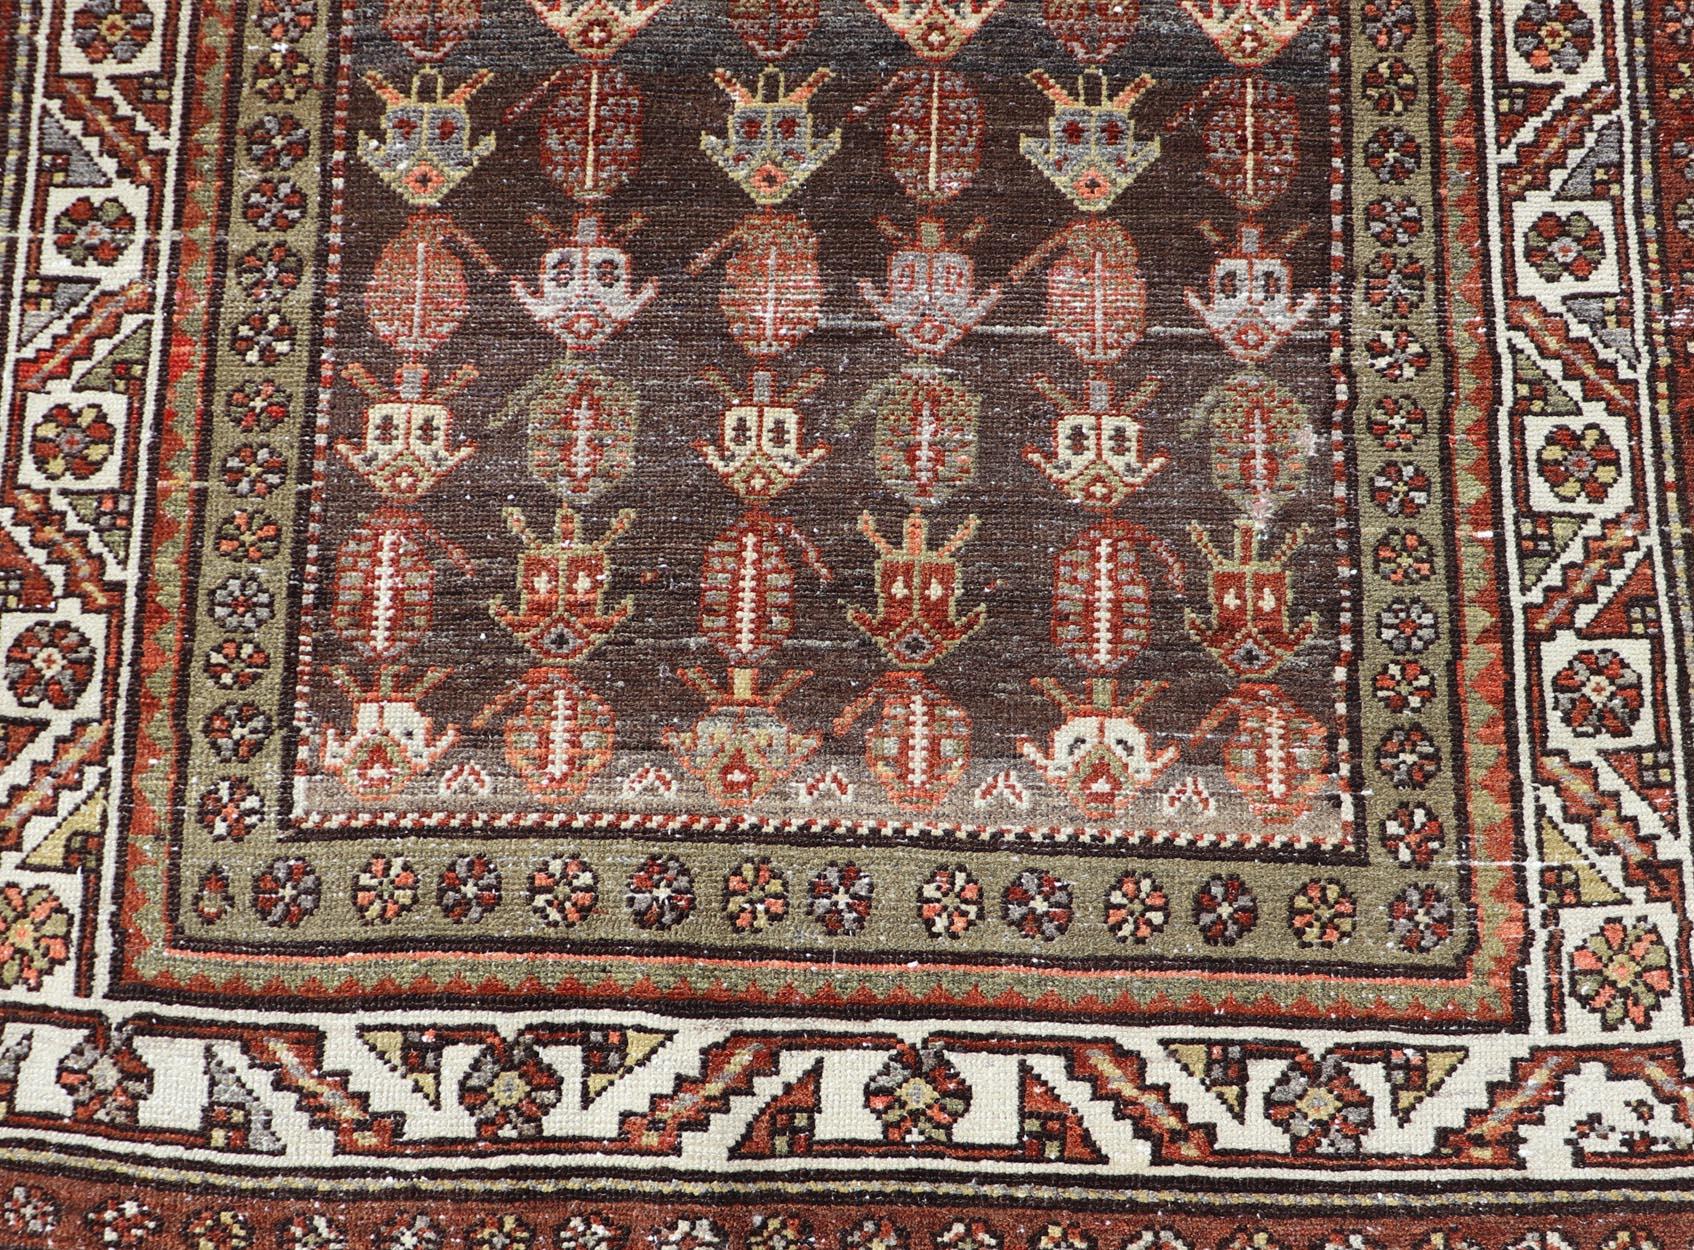 Antique Persian Hamadan rug in Wool with All-Over Sub-Geometric Tribal Design. Keivan Woven Arts; rug W22-0101, country of origin / type: Iran / Hamadan, circa 1920.
Measures: 3'7 x 7'3 
This antique Persian Hamadan rug has been hand-knotted in